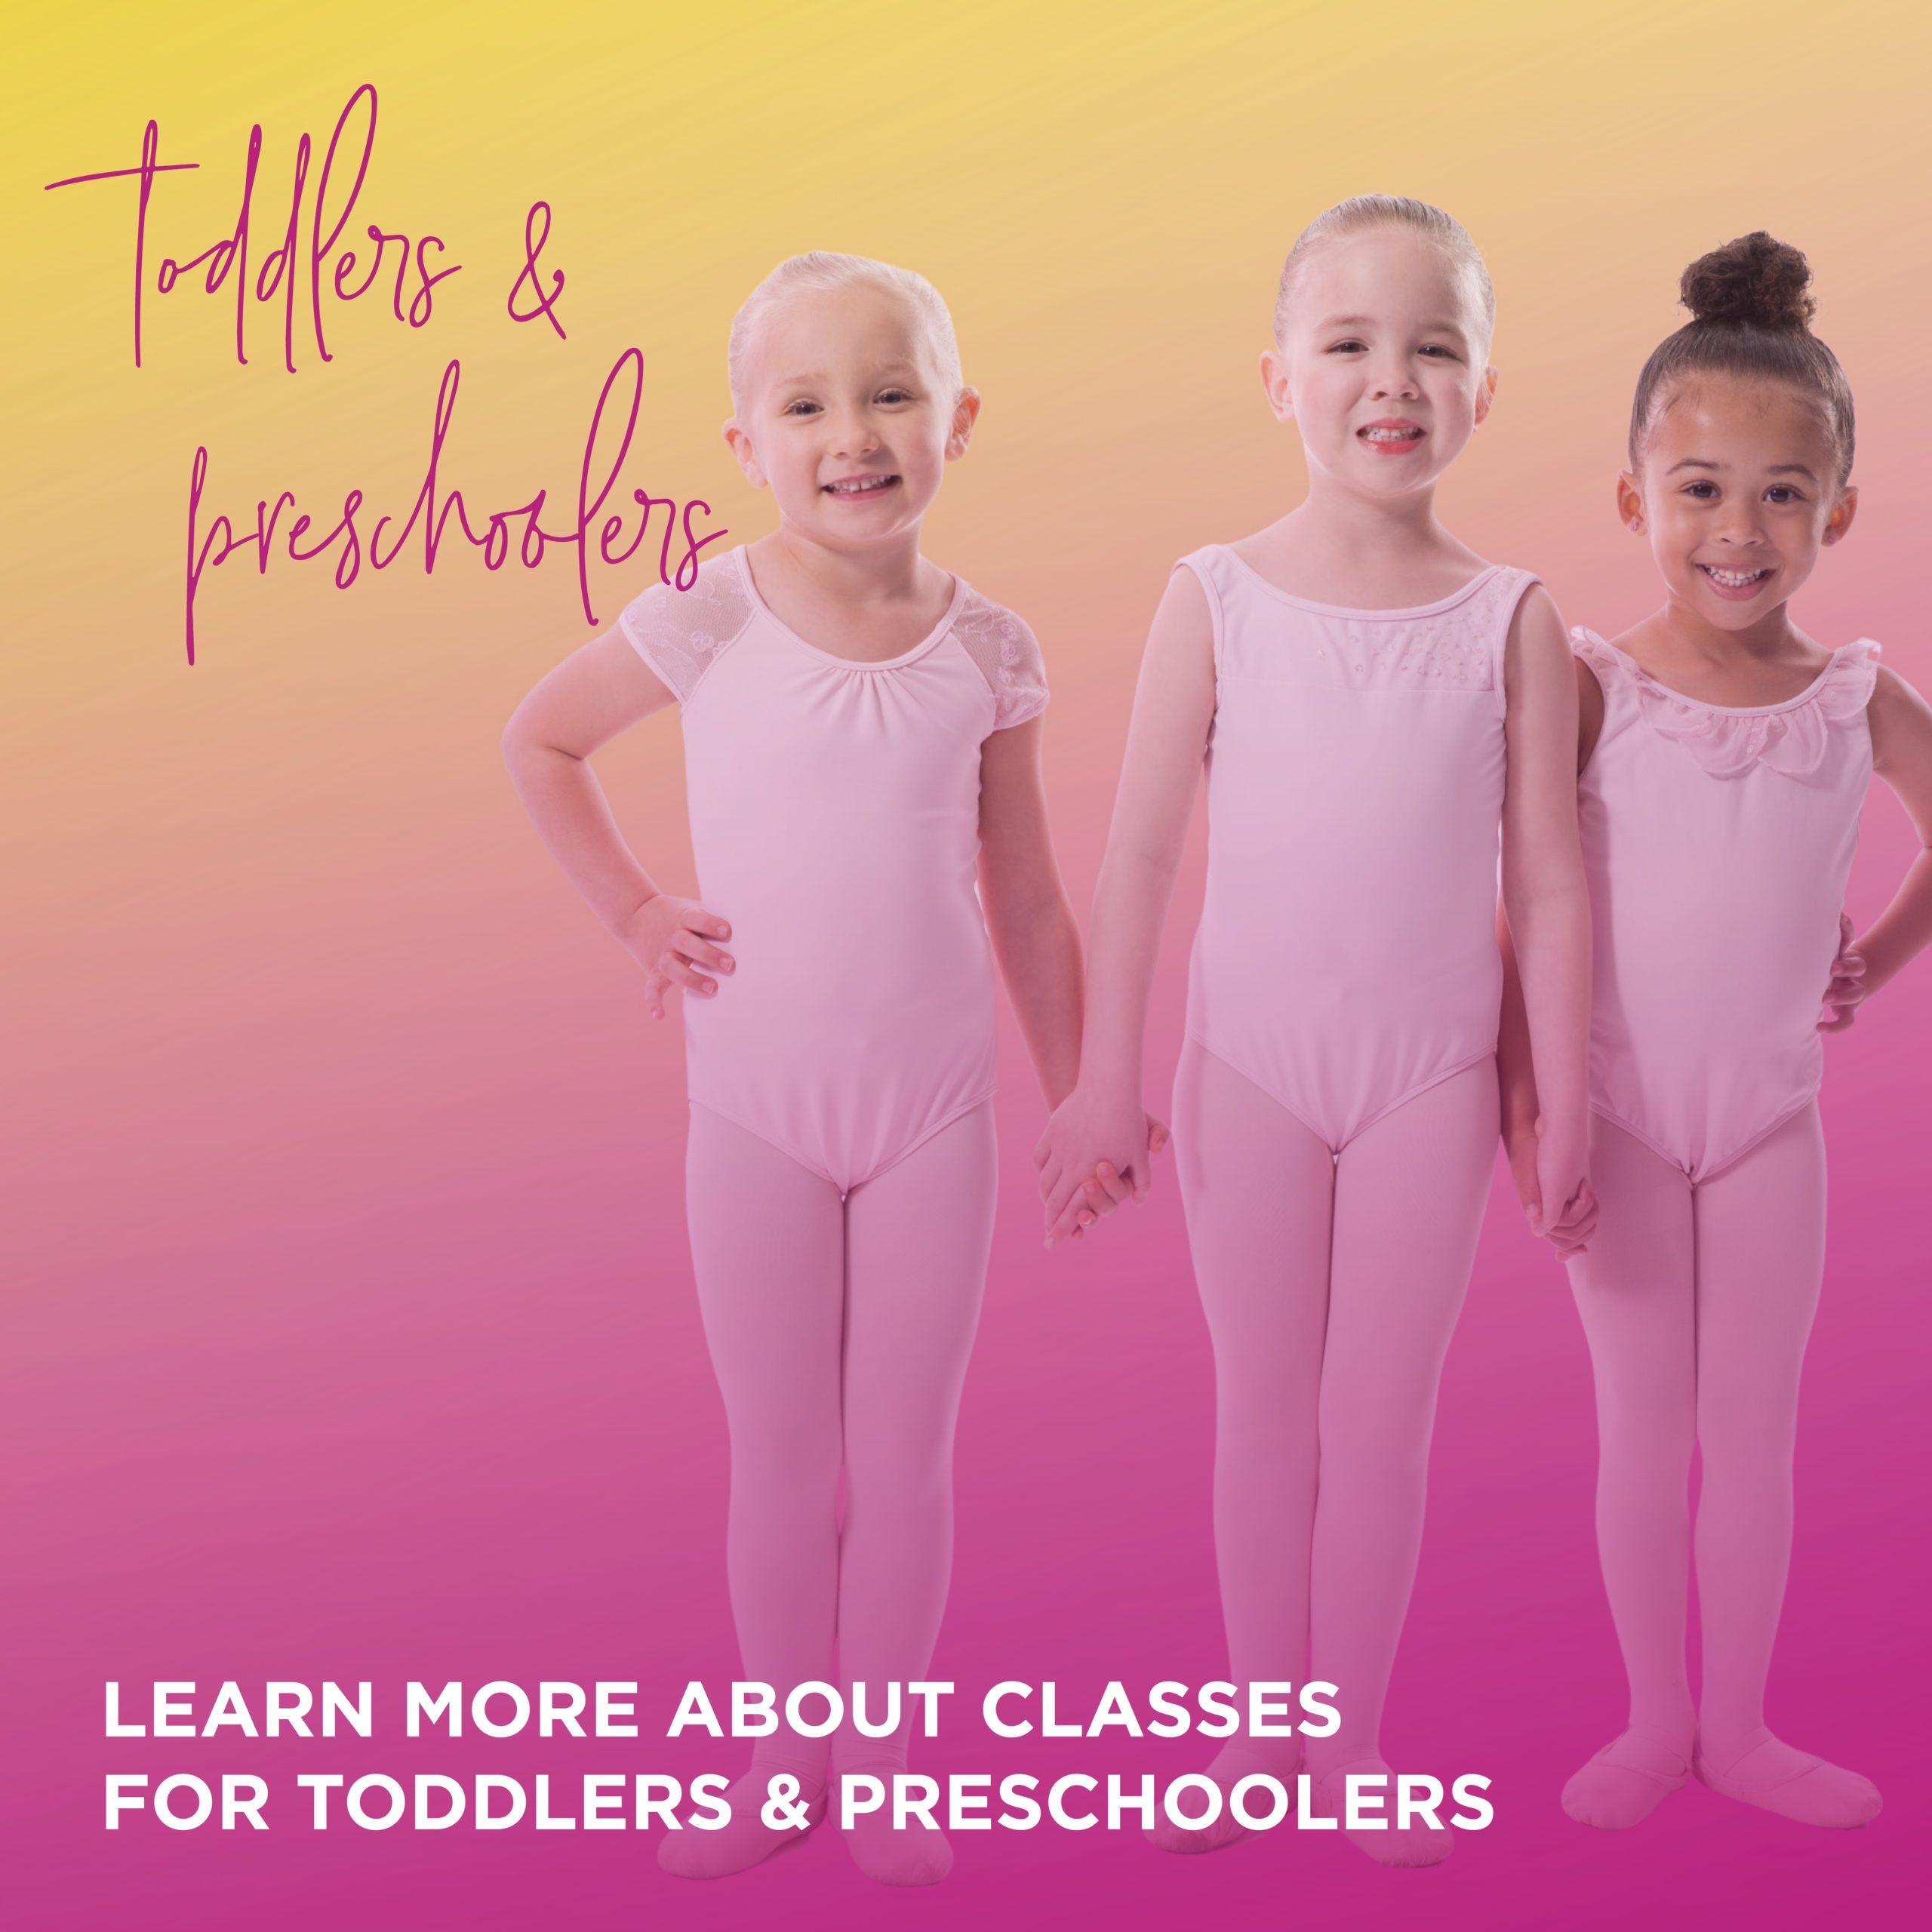 Dance Classes for Toddlers and Preschoolers